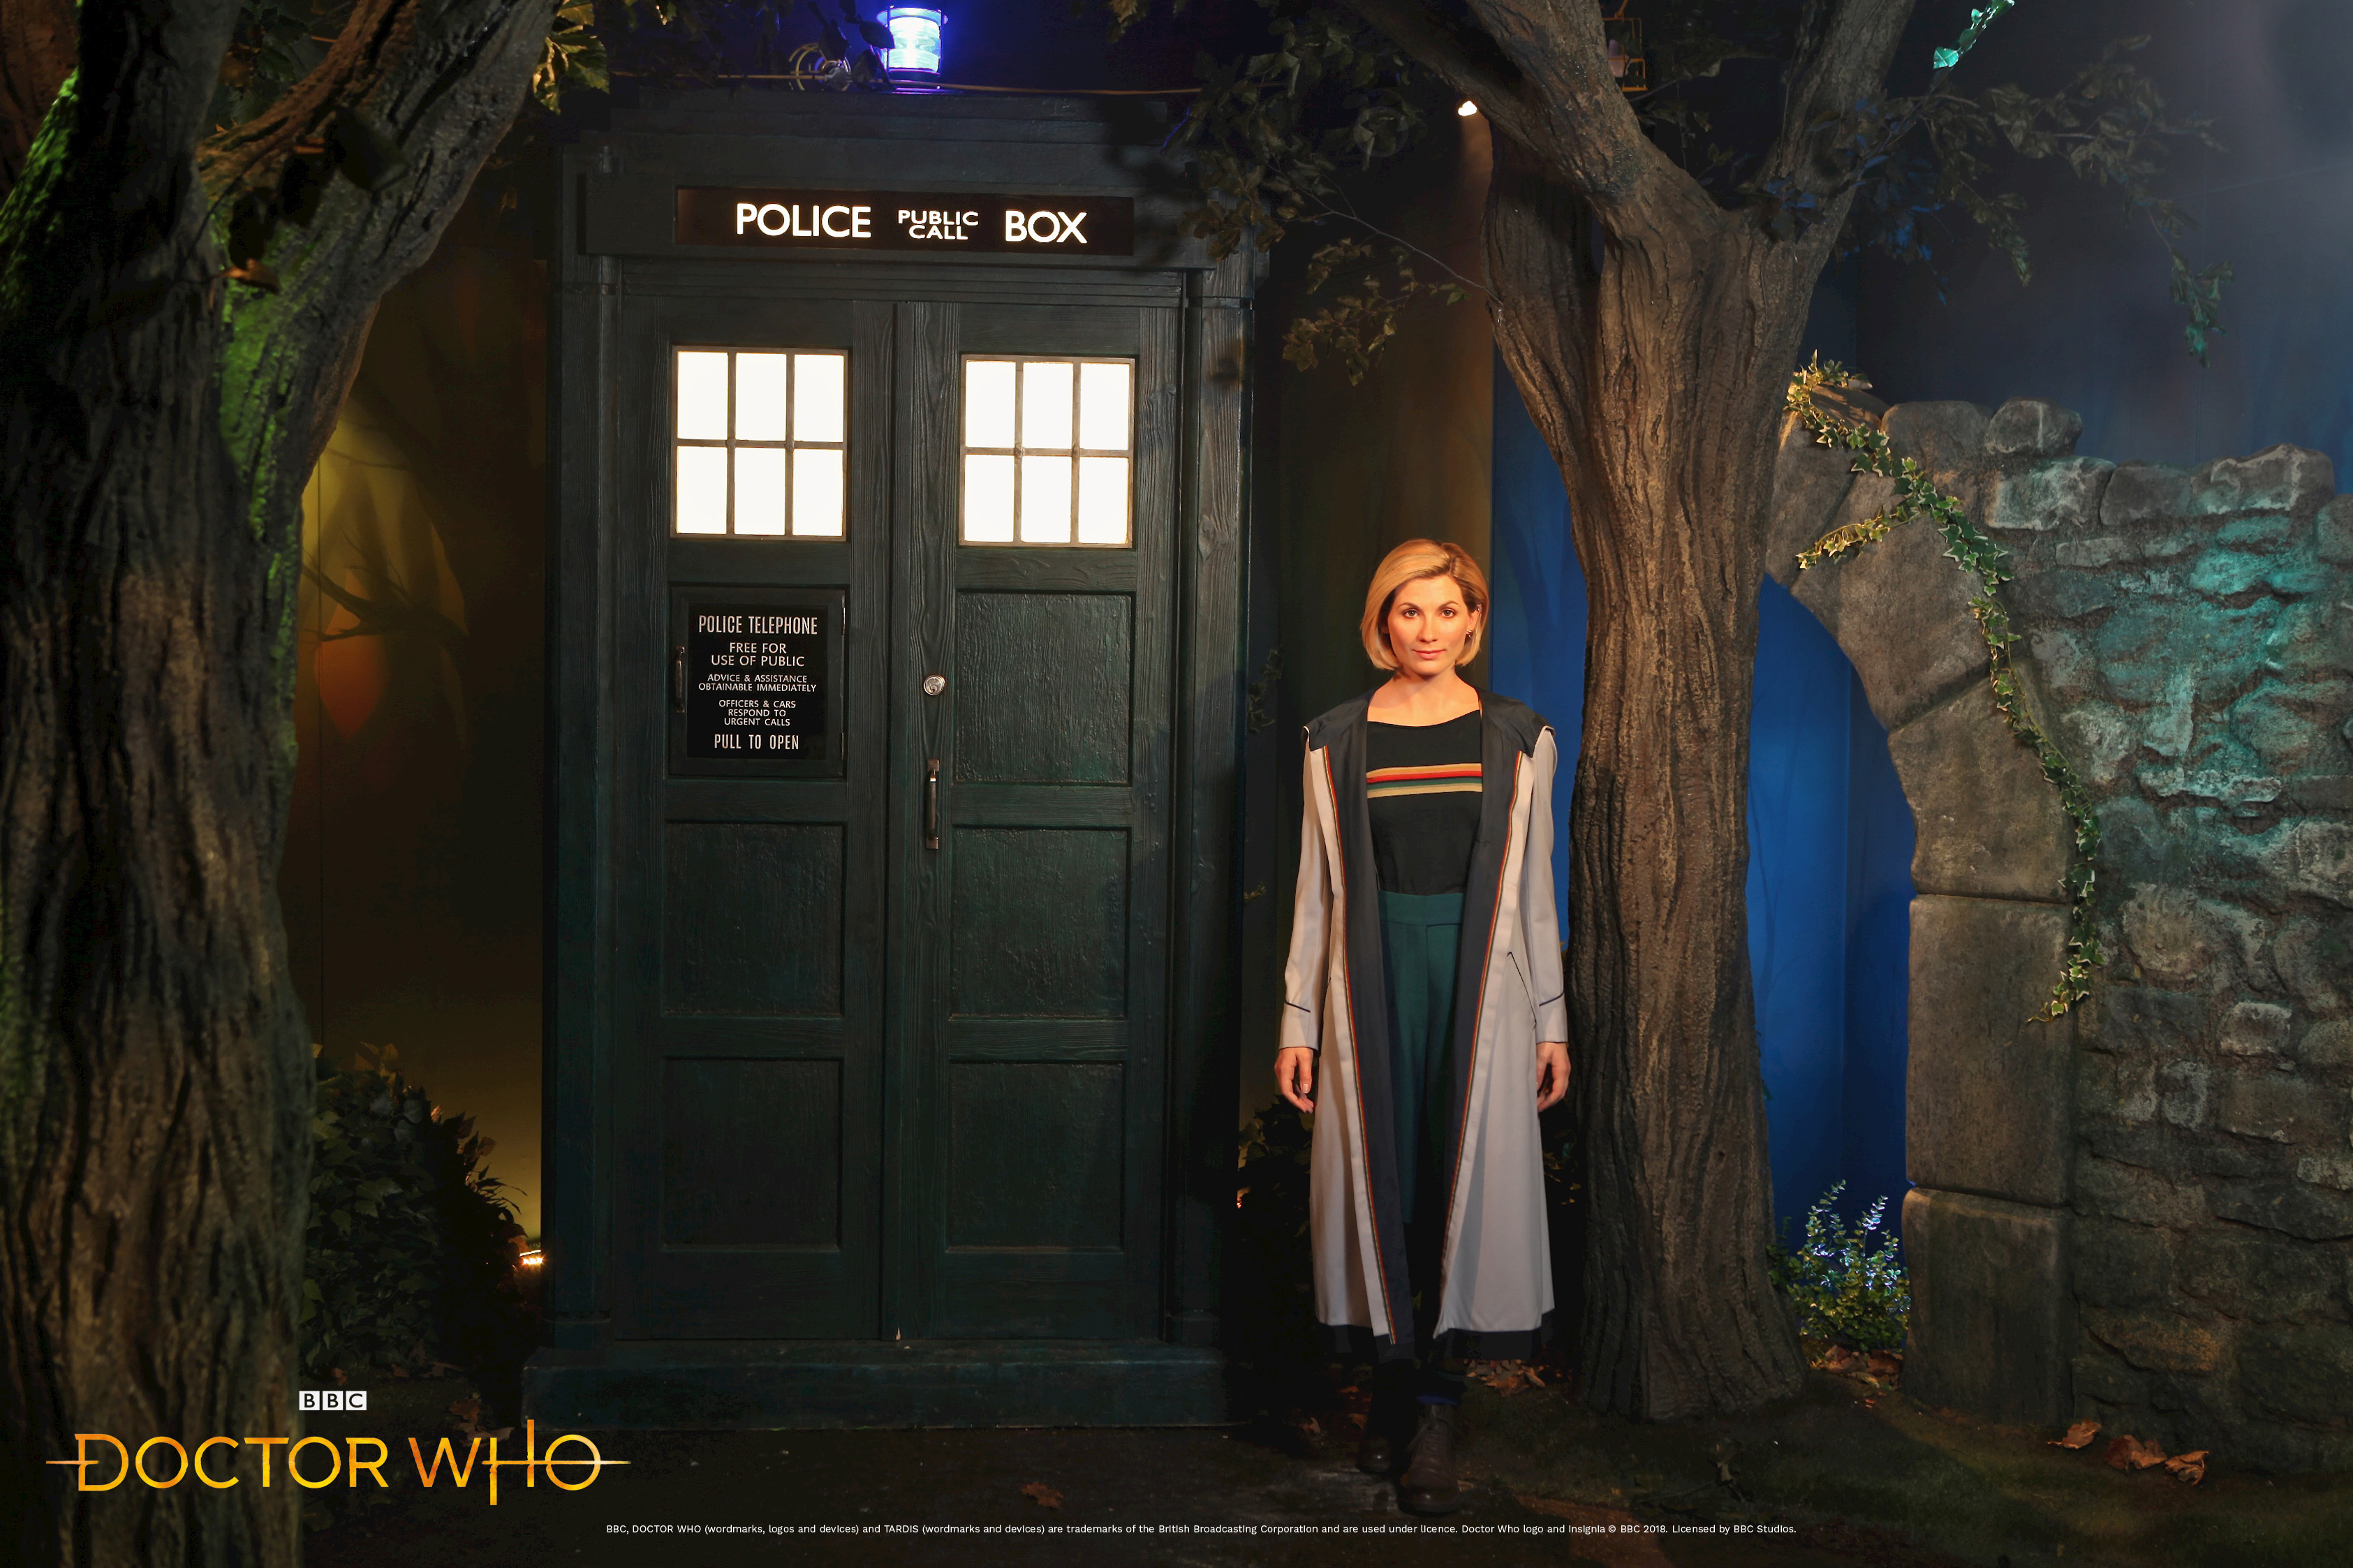 Dr Who wax figure at Madame Tussauds Blackpool